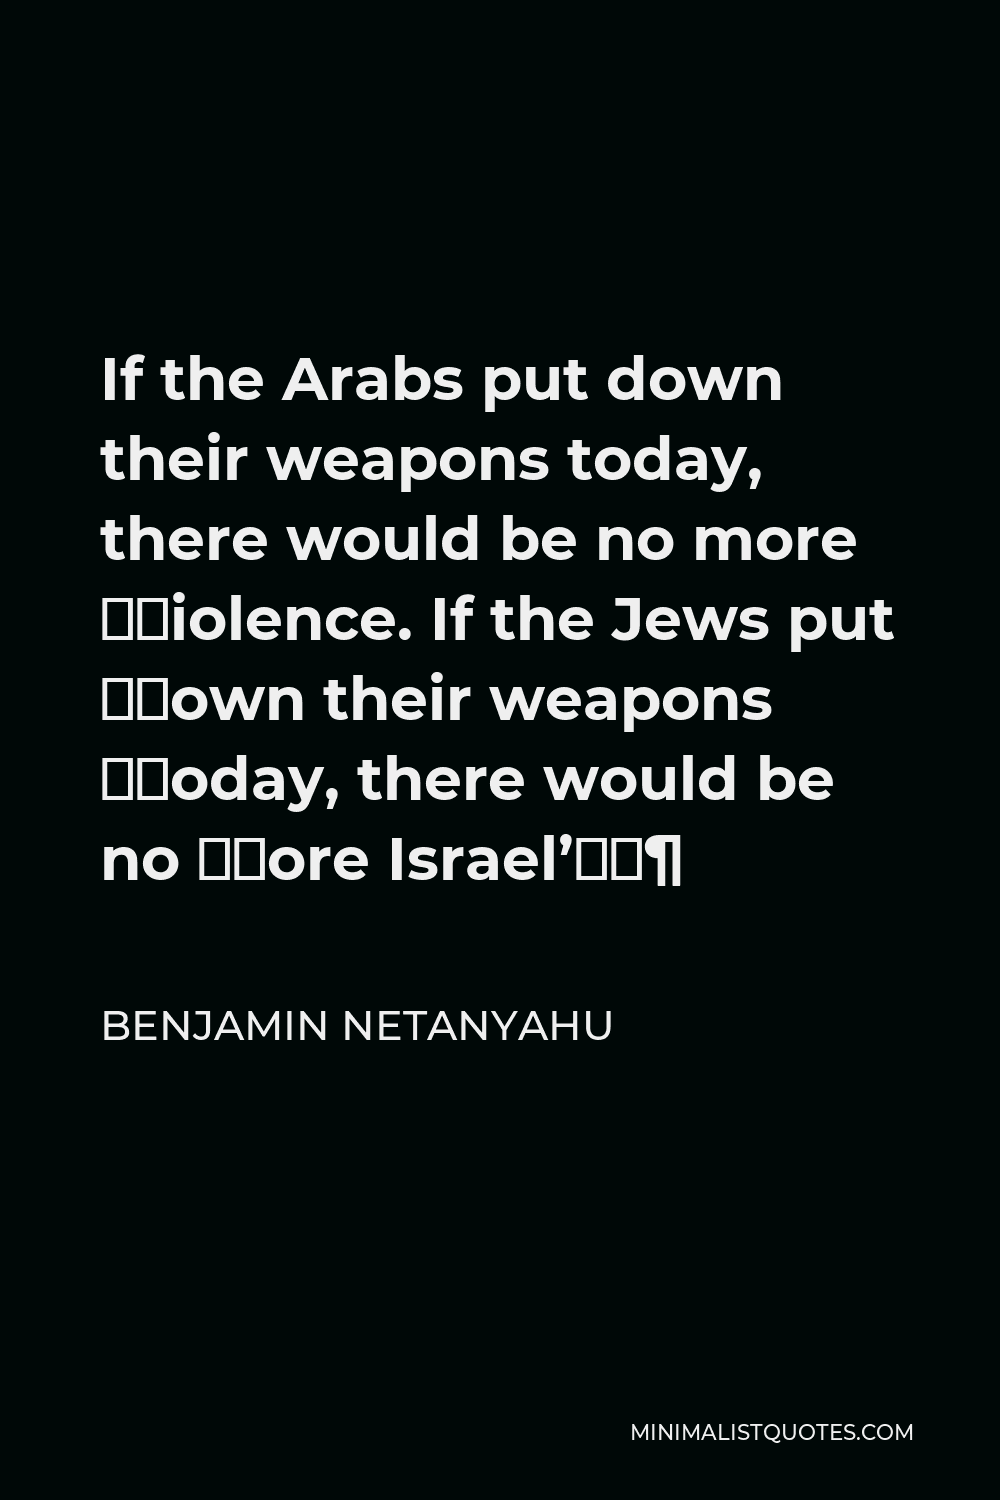 Benjamin Netanyahu Quote - If the Arabs put down their weapons today, there would be no more ‎violence. If the Jews put ‎down their weapons ‎today, there would be no ‎more Israel’‎